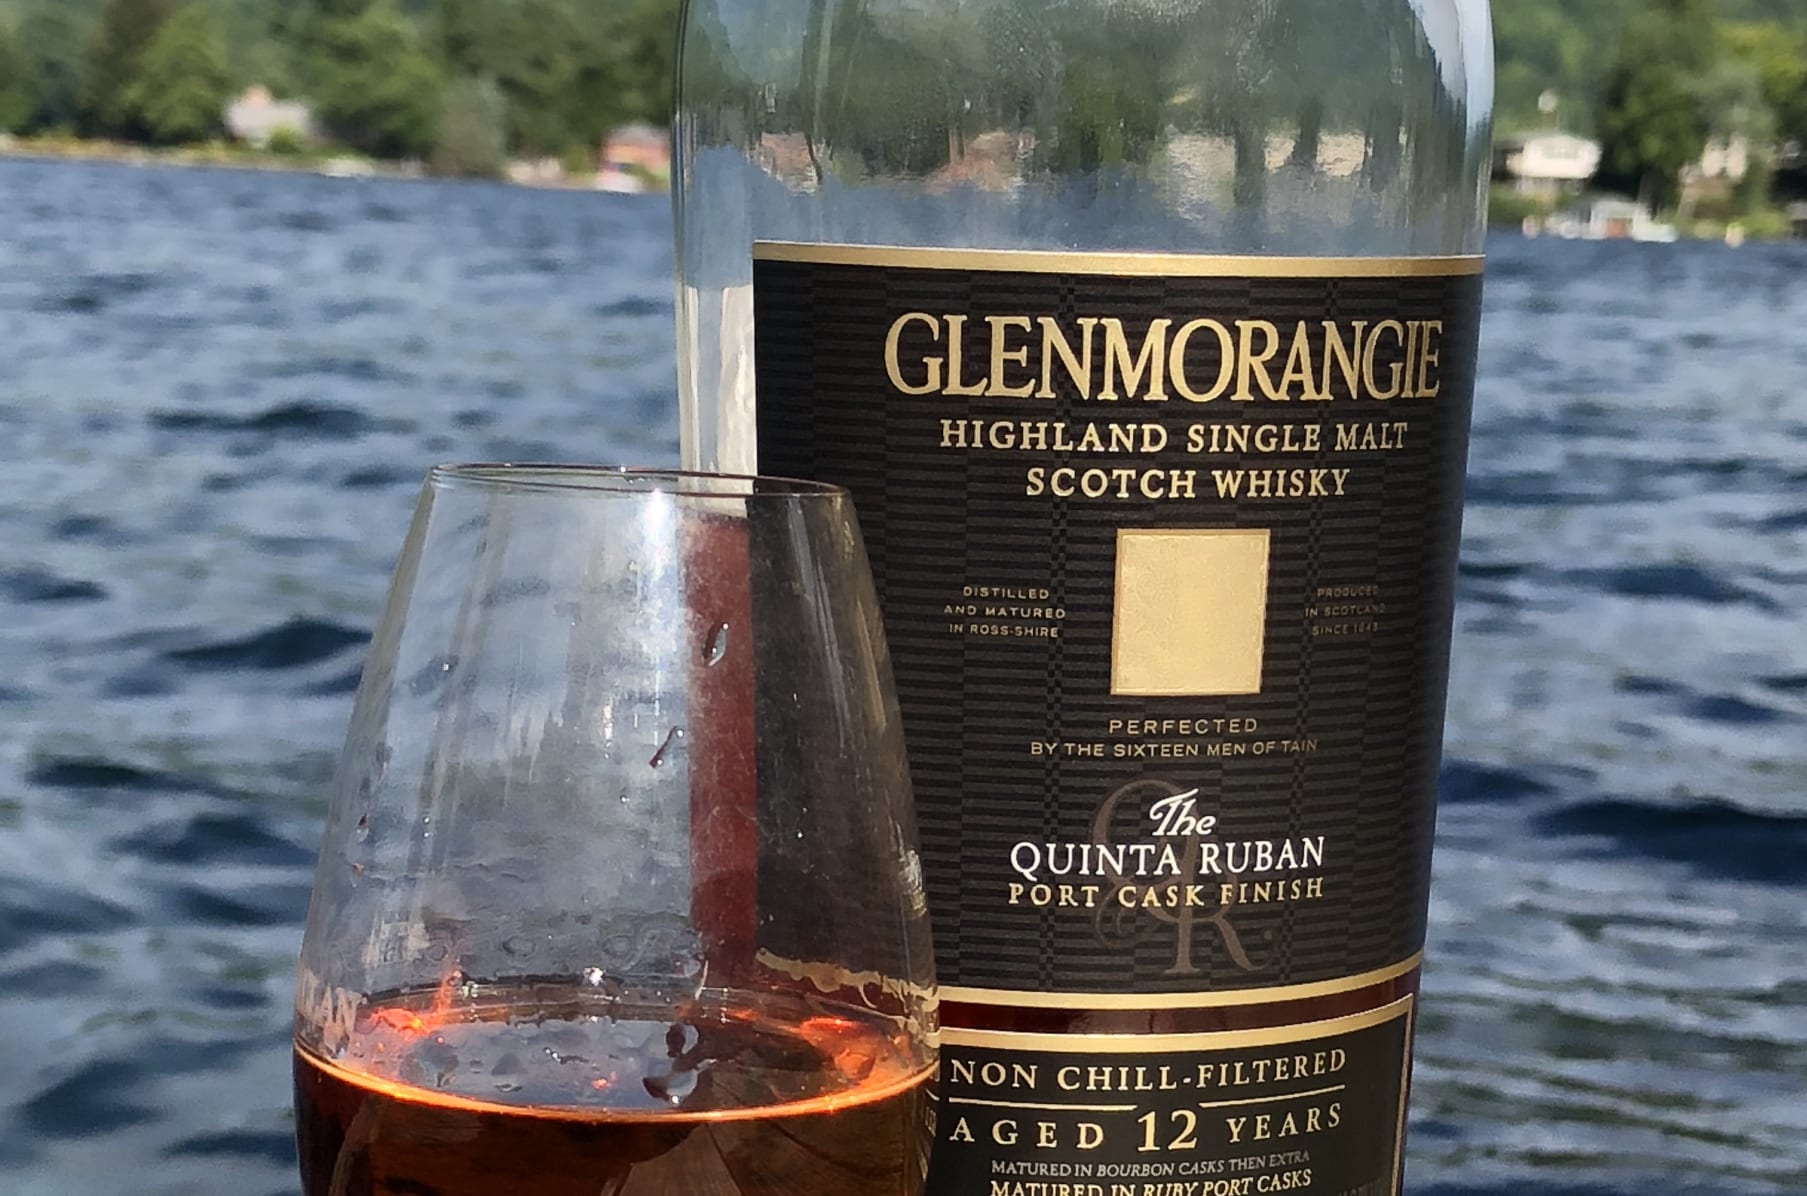 The Glenmorangie Company Working Together on Modern Apprenticeships